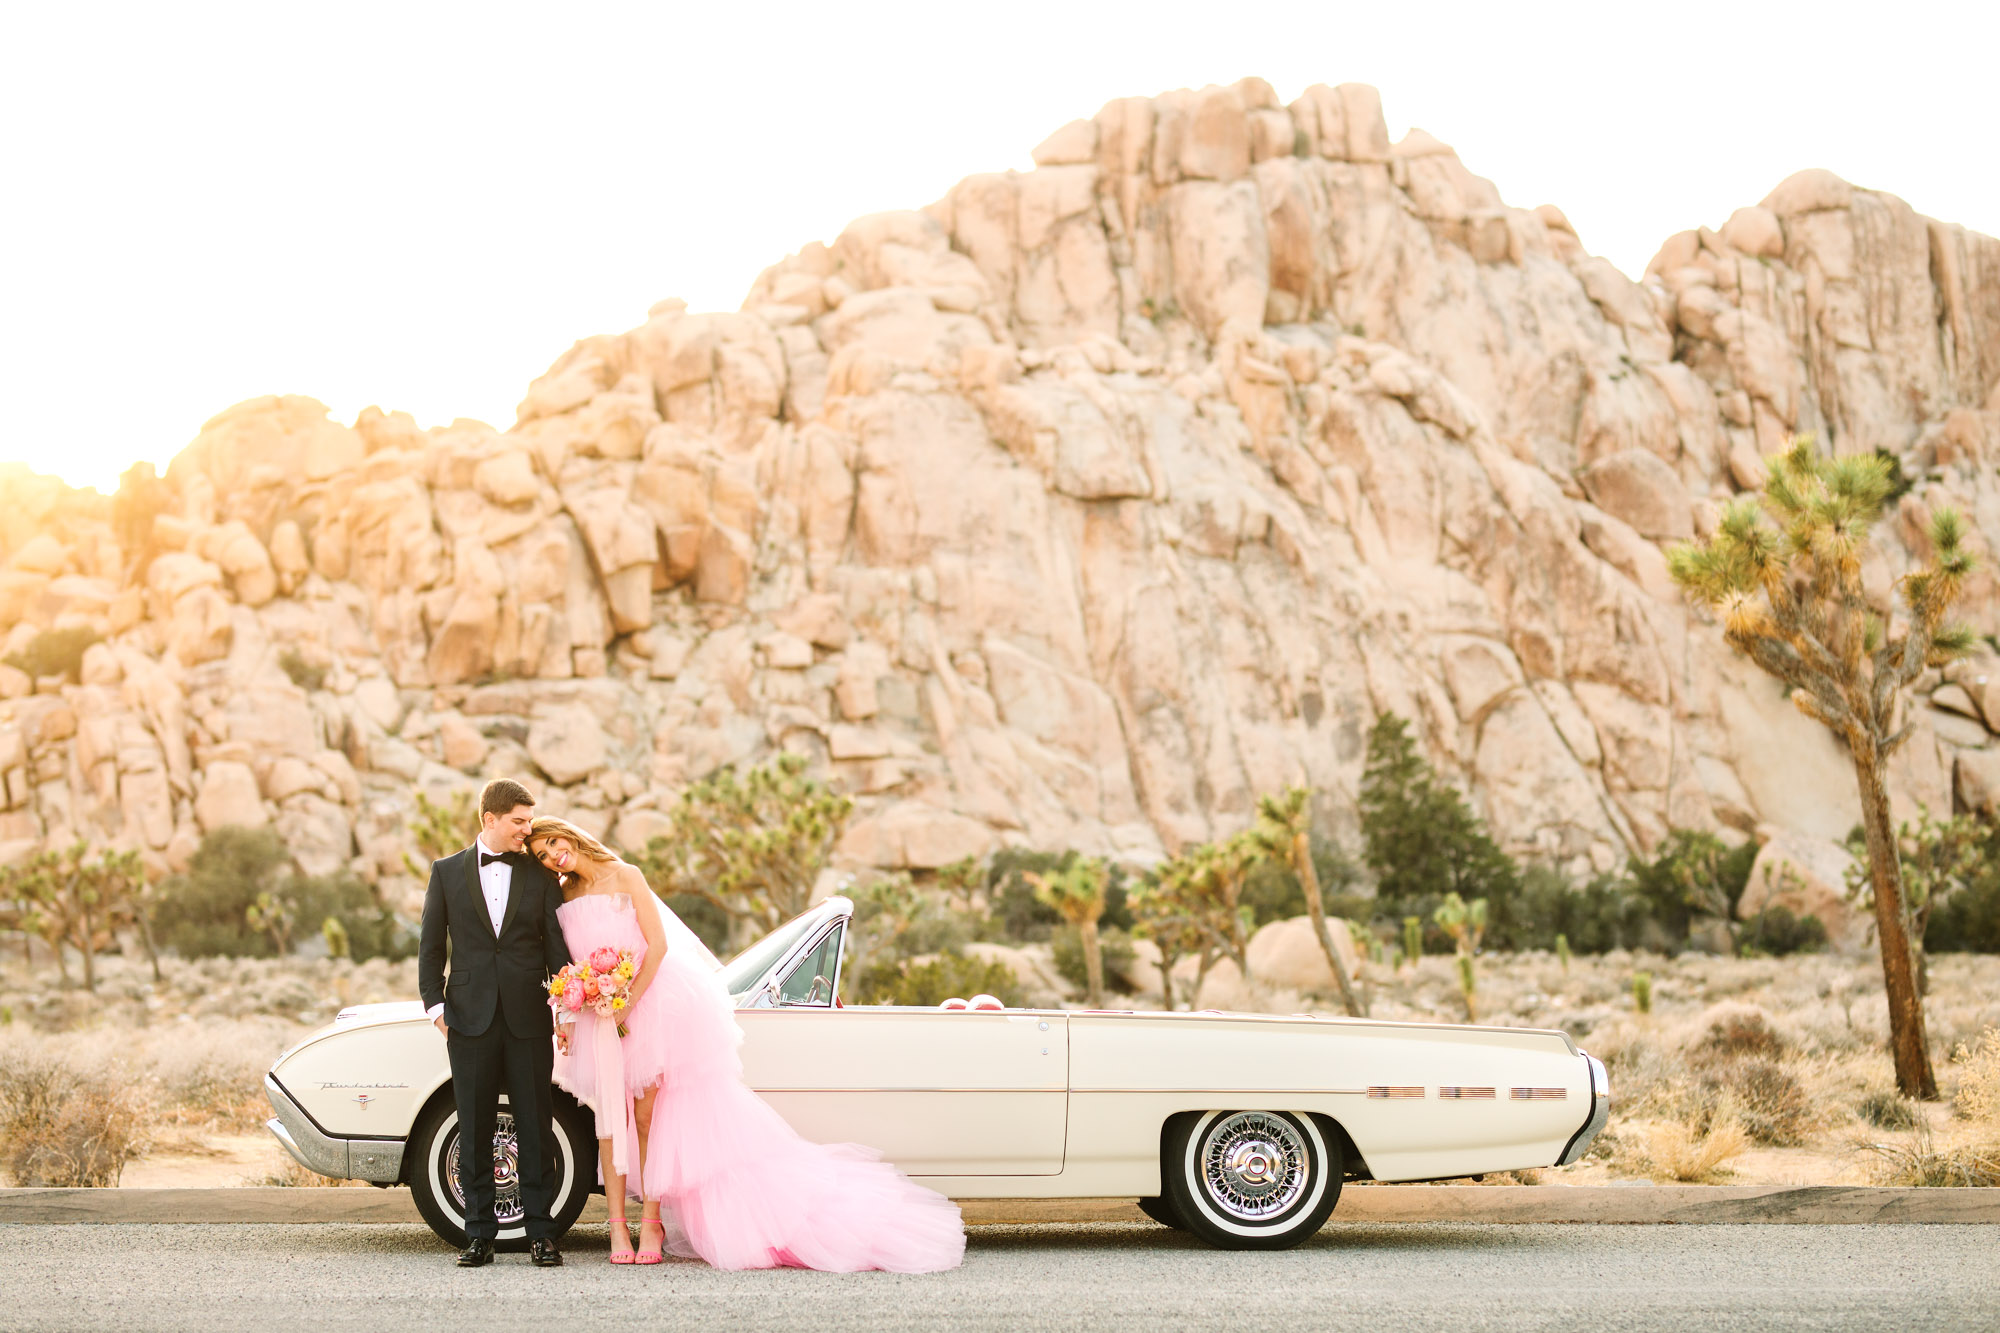 Bride and groom with a white classic Ford Thunderbird convertible car | Pink wedding dress Joshua Tree elopement featured on Green Wedding Shoes | Colorful desert wedding inspiration for fun-loving couples in Southern California #joshuatreewedding #joshuatreeelopement #pinkwedding #greenweddingshoes Source: Mary Costa Photography | Los Angeles